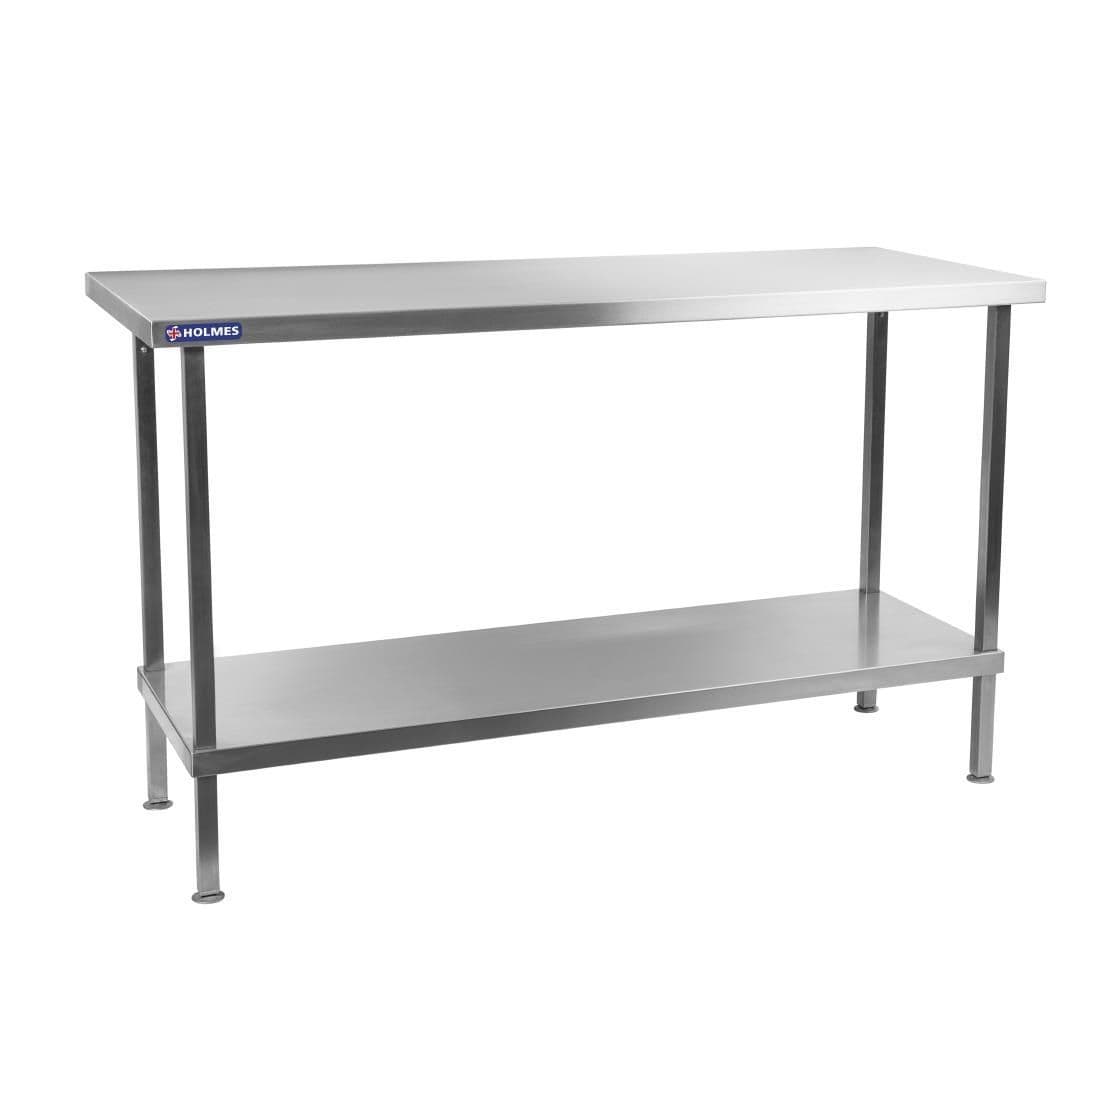 DR041 Holmes Stainless Steel Centre Table 600mm JD Catering Equipment Solutions Ltd